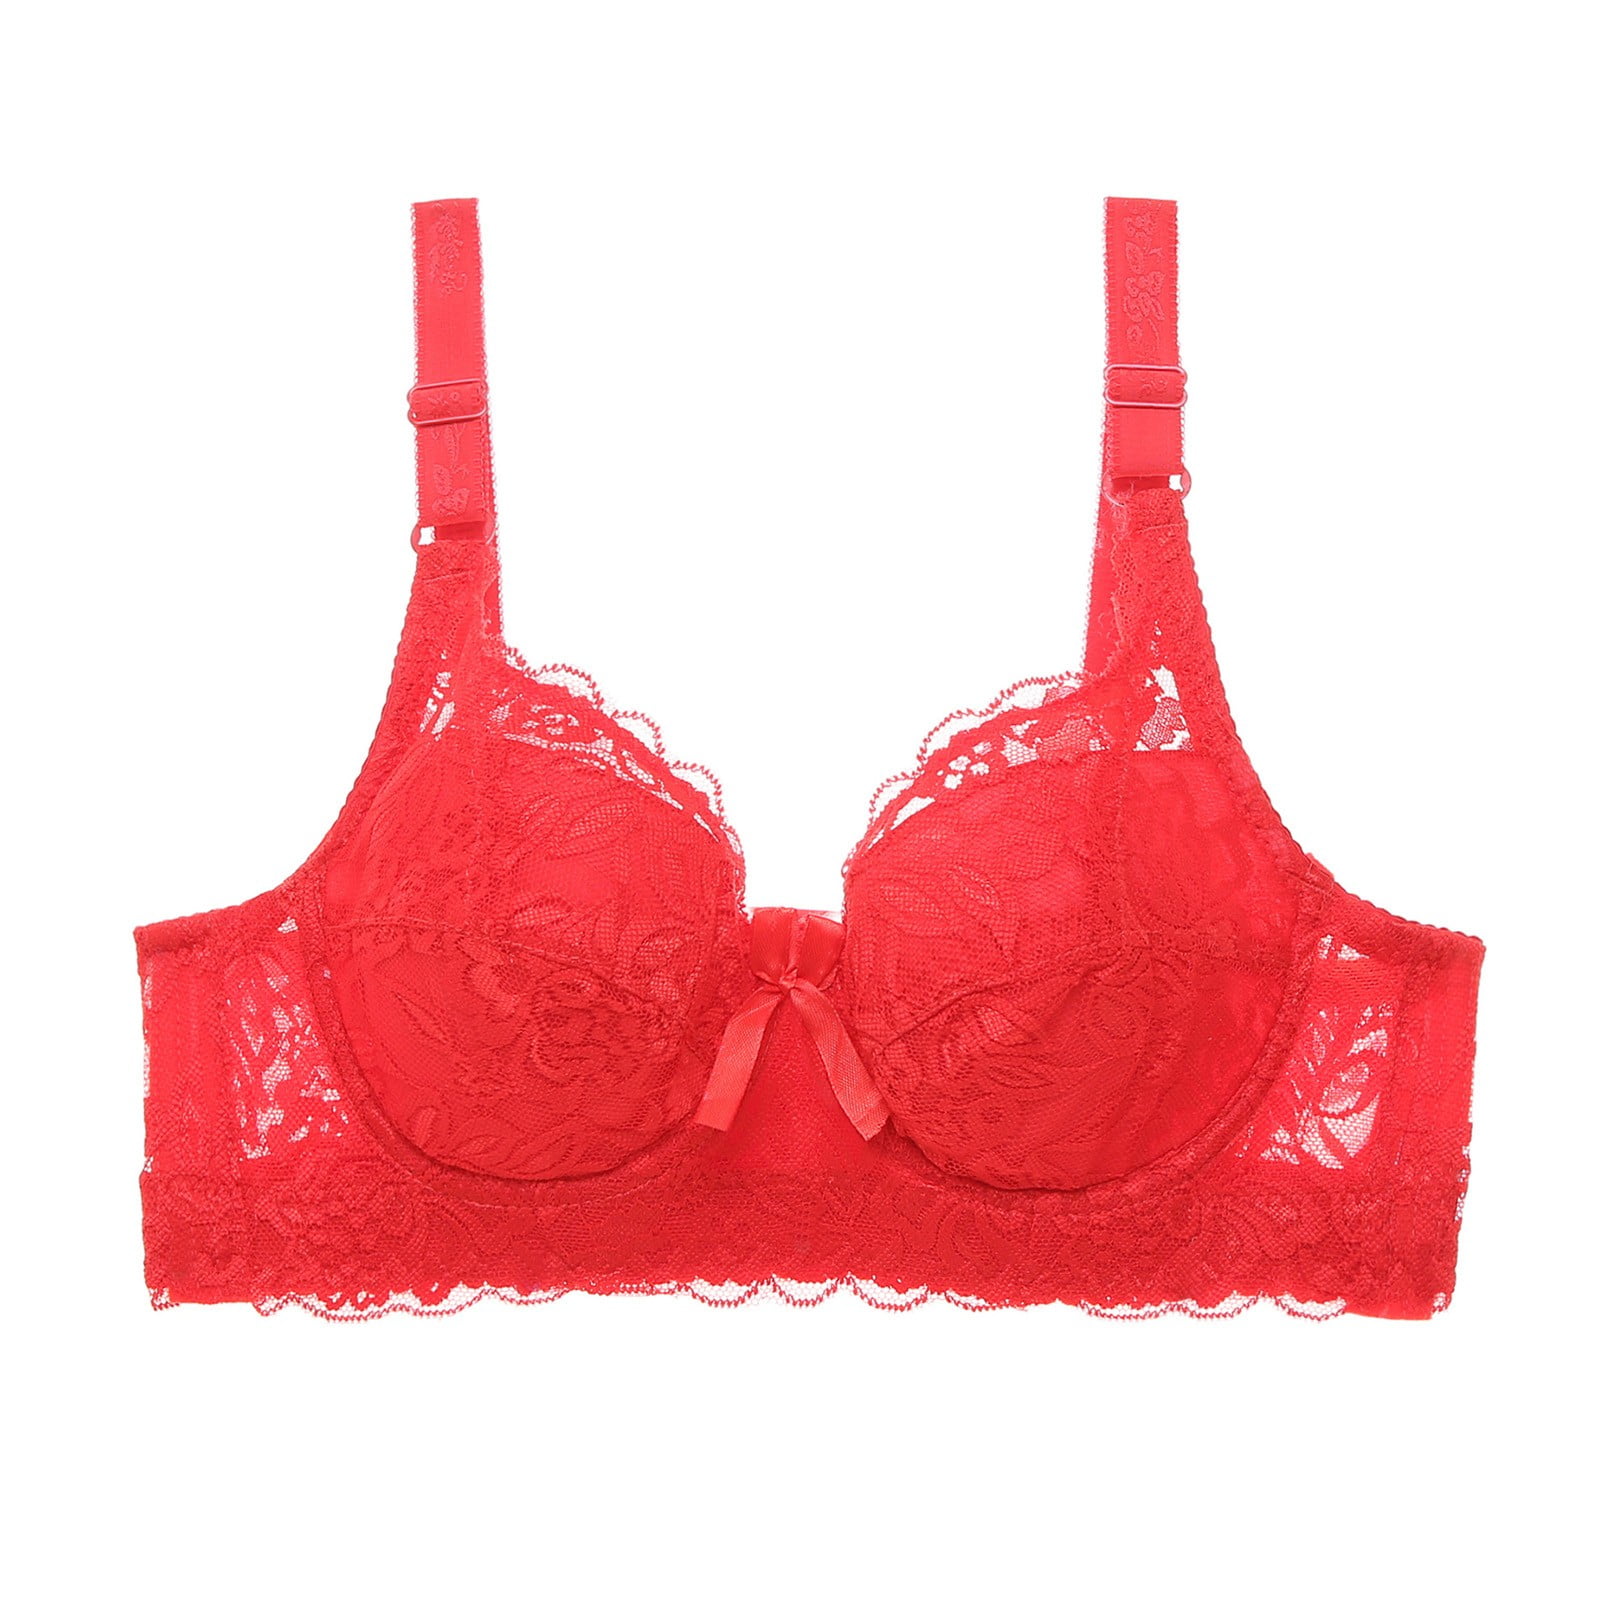 Underoutfit Bras for Women Underwire Push-Up Bralettes Lace Red